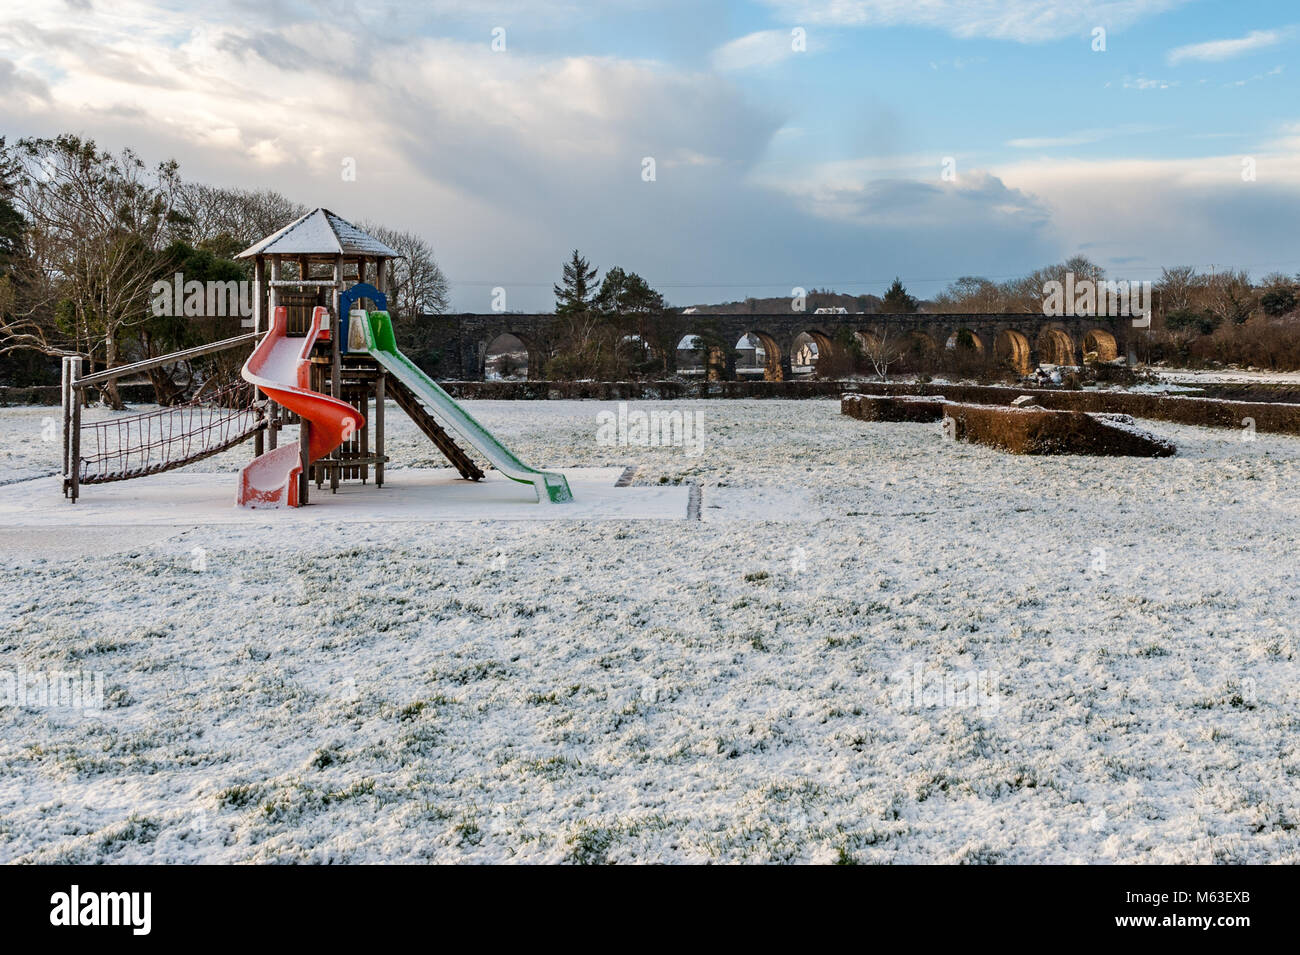 Ballydehob, Ireland. 28th Feb, 2018.  Heavy snow hit West Cork overnight causing widespread travel disruption. Bus Eireann cancelled all school bus services due to the Met Eireann Red Weather Warning.  More snow and freezing temperatures are expected up until the weekend. The playground and 12 Arch Bridge in Ballydehob are pictured covered in a blanket of snow. Credit: Andy Gibson/Alamy Live News. Stock Photo